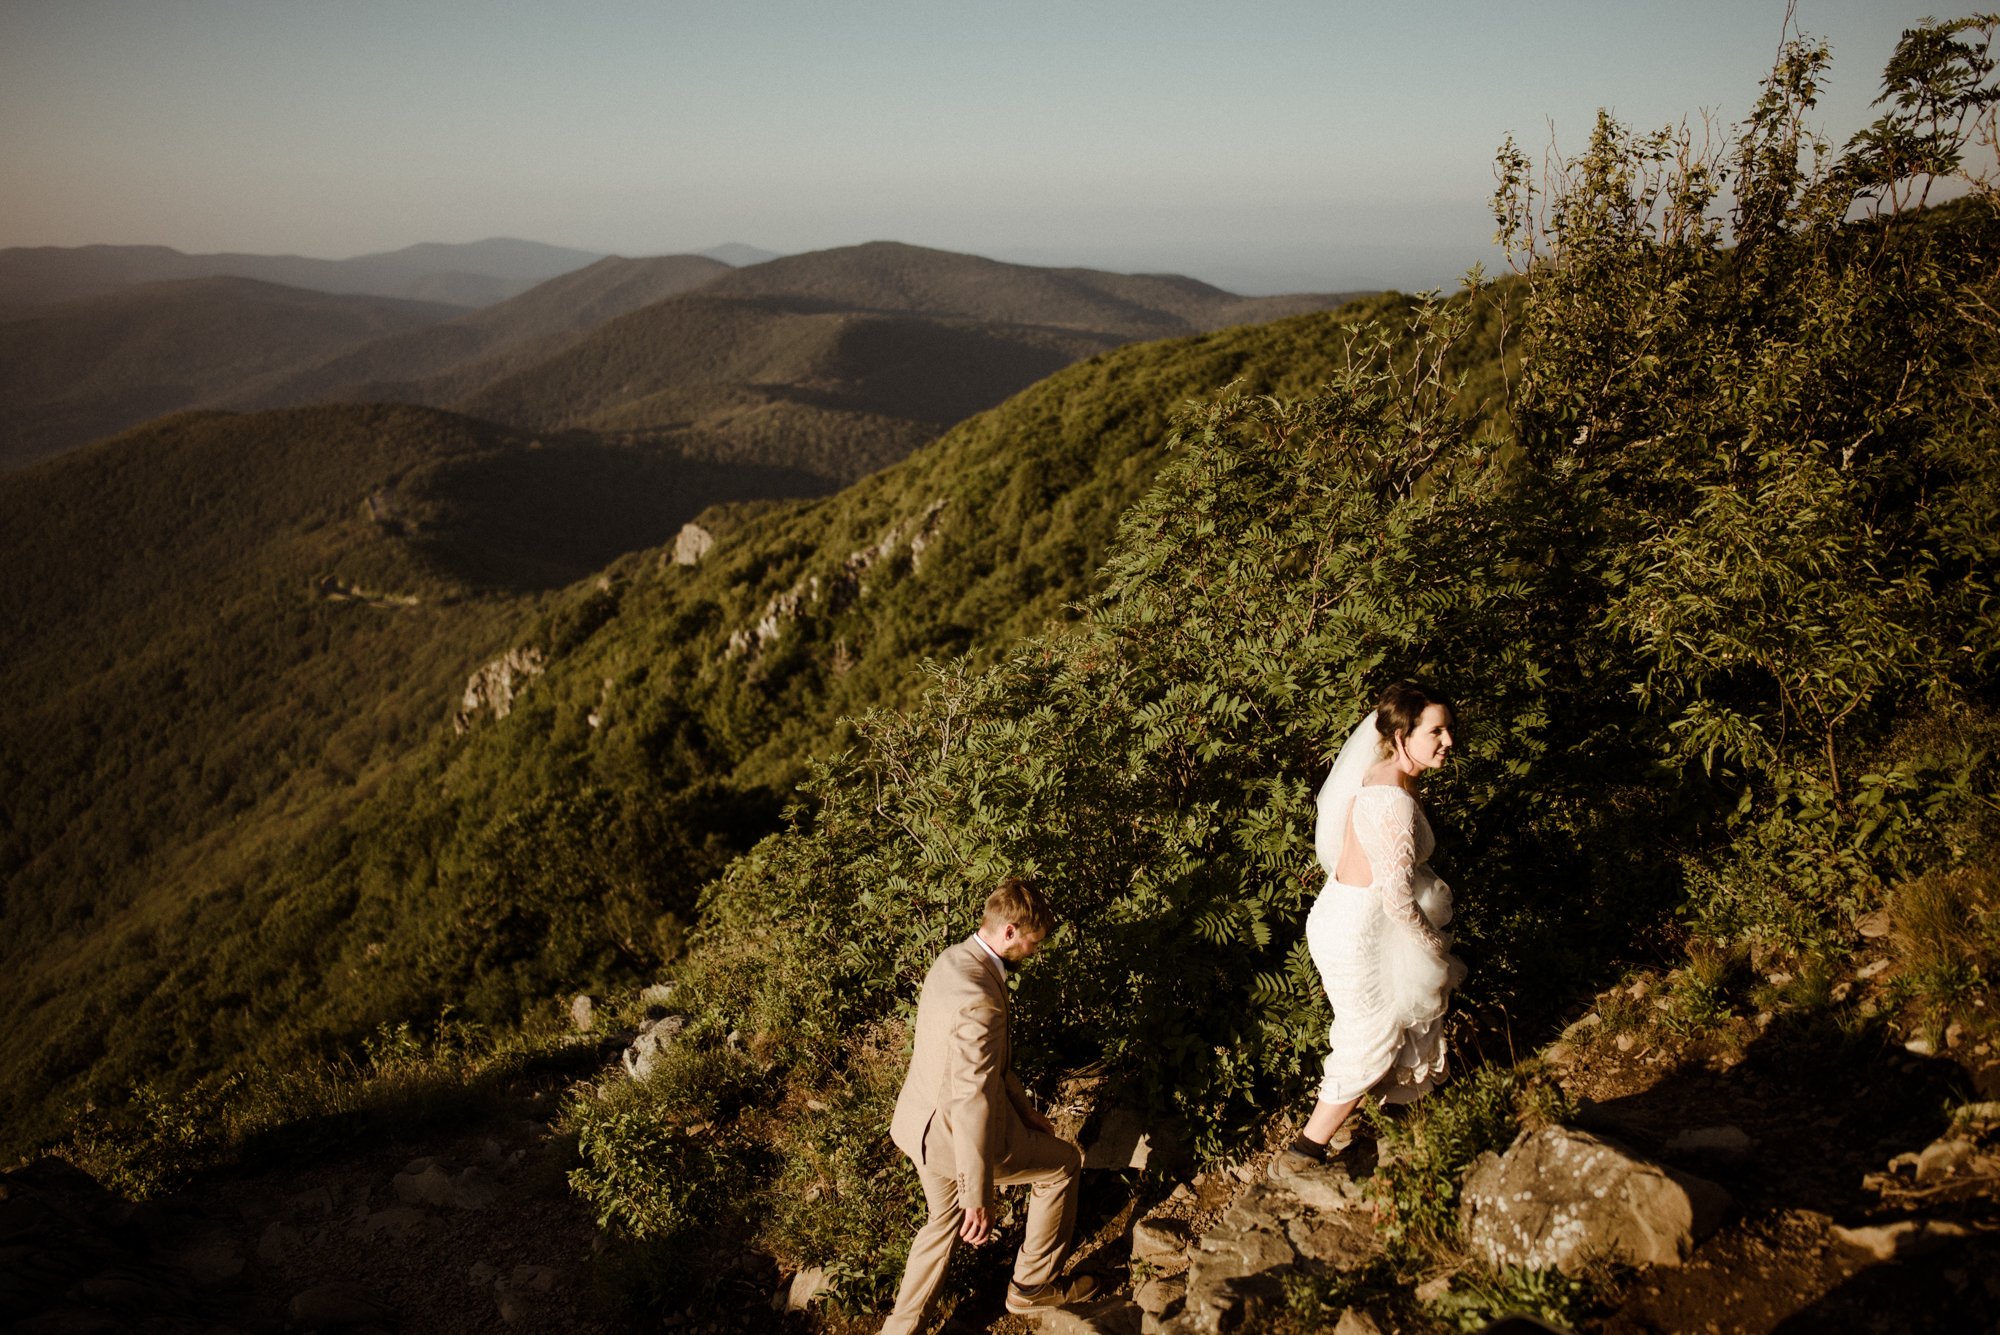 Sunset Elopement on Stony Man Summit in Shenandoah National Park - White Sails Creative Elopement Photography - July Elopement on the Blue Ridge Parkway_57.jpg